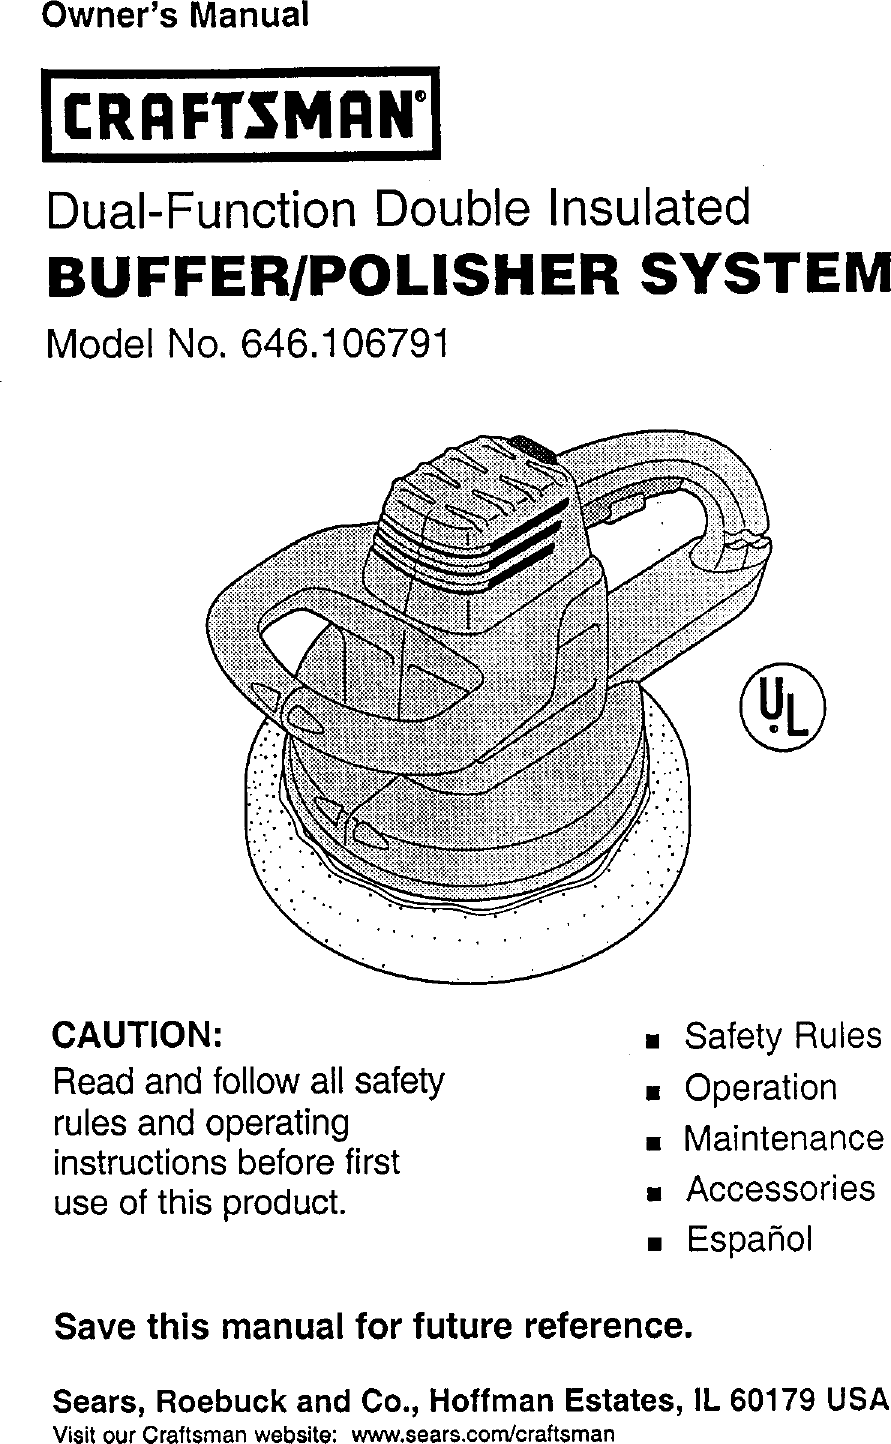 Page 1 of 7 - Craftsman 646106791 User Manual  BUFFER/POLISHER SYSTEM - Manuals And Guides L0020228